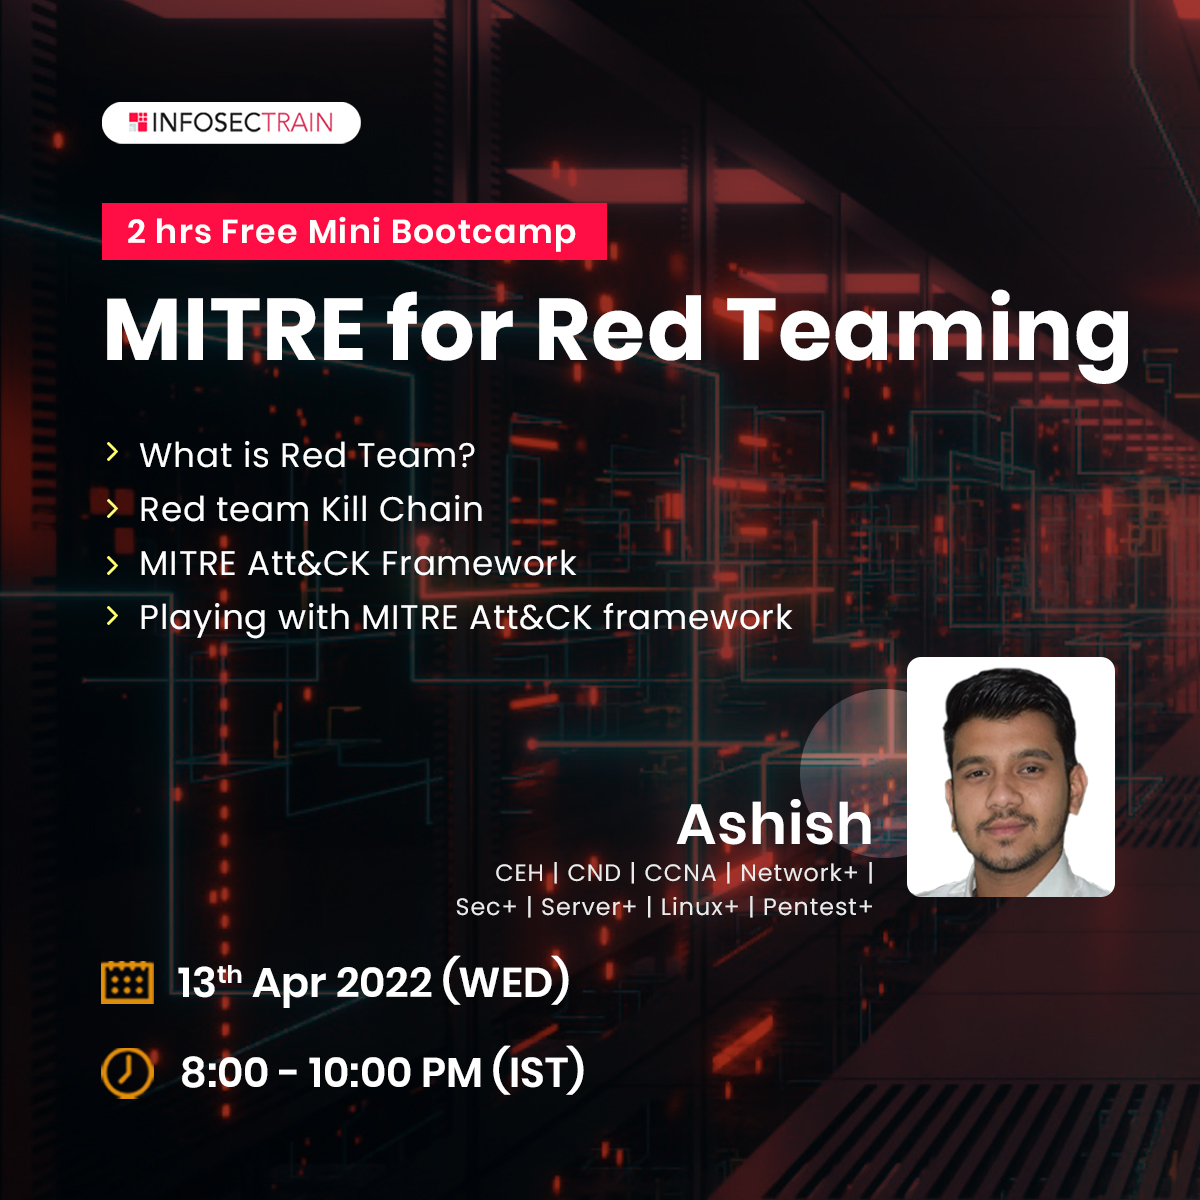 Free webinar on MITRE For Red Teaming, Online Event